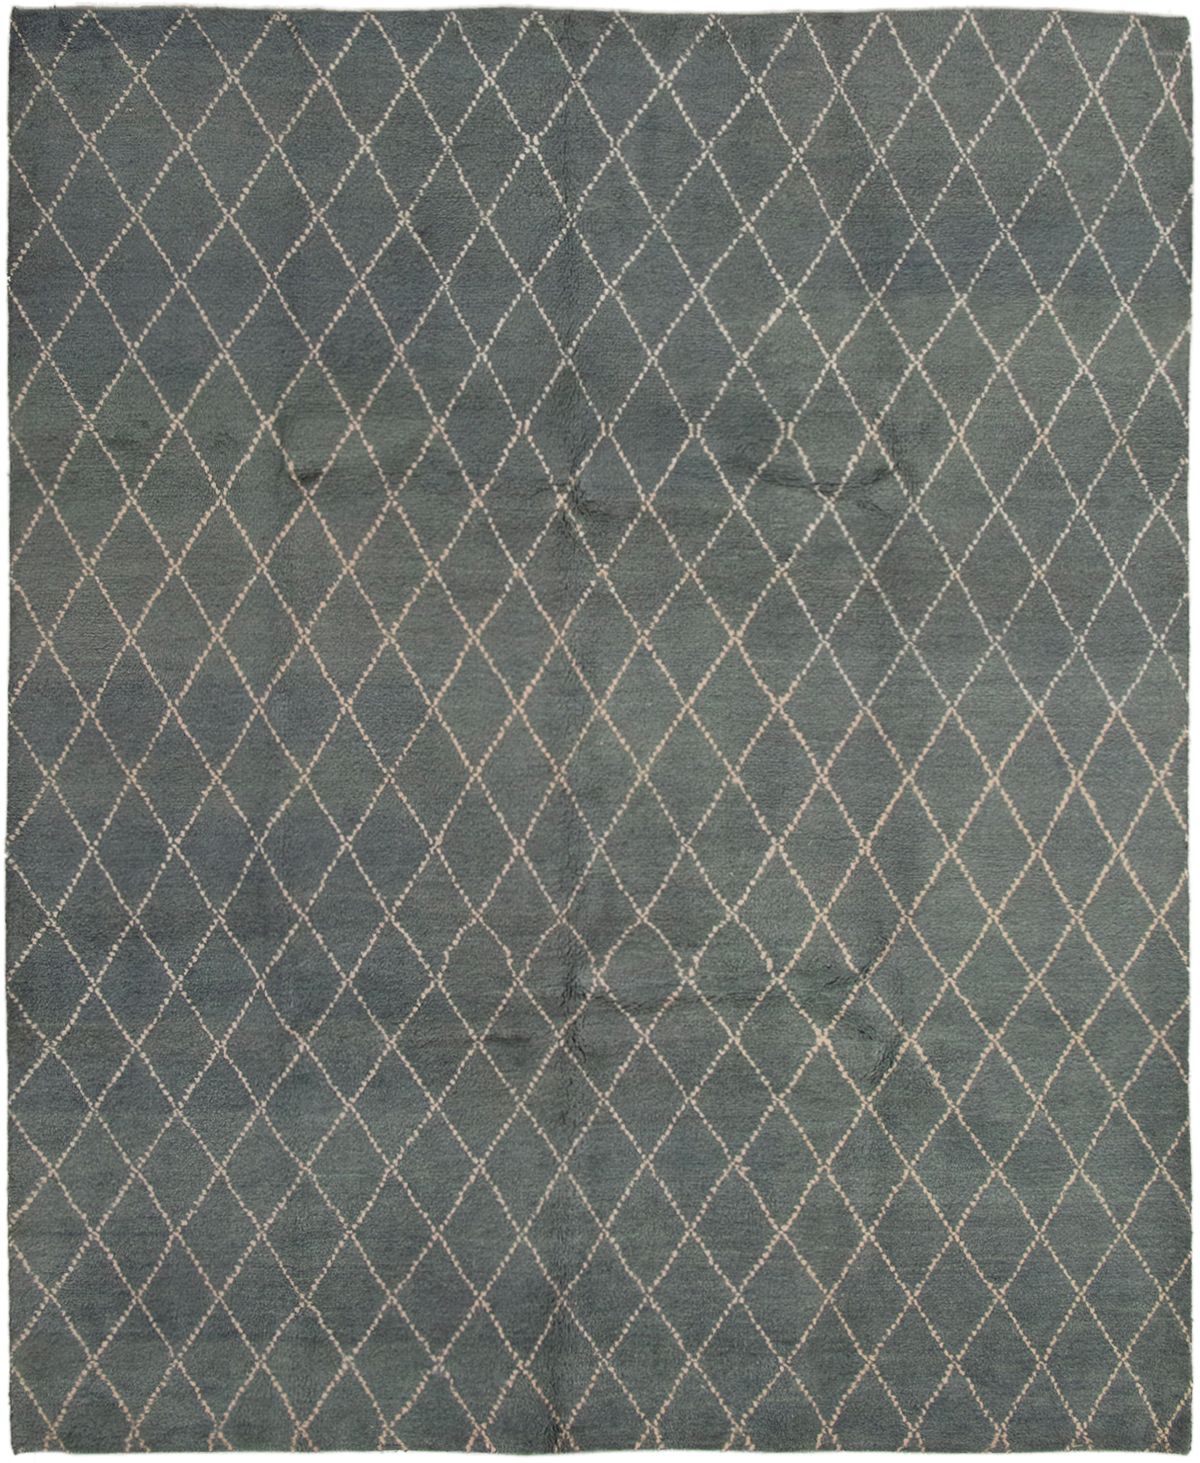 Hand-knotted Arlequin Turquoise Wool Rug 8'0" x 9'9" Size: 8'0" x 9'9"  